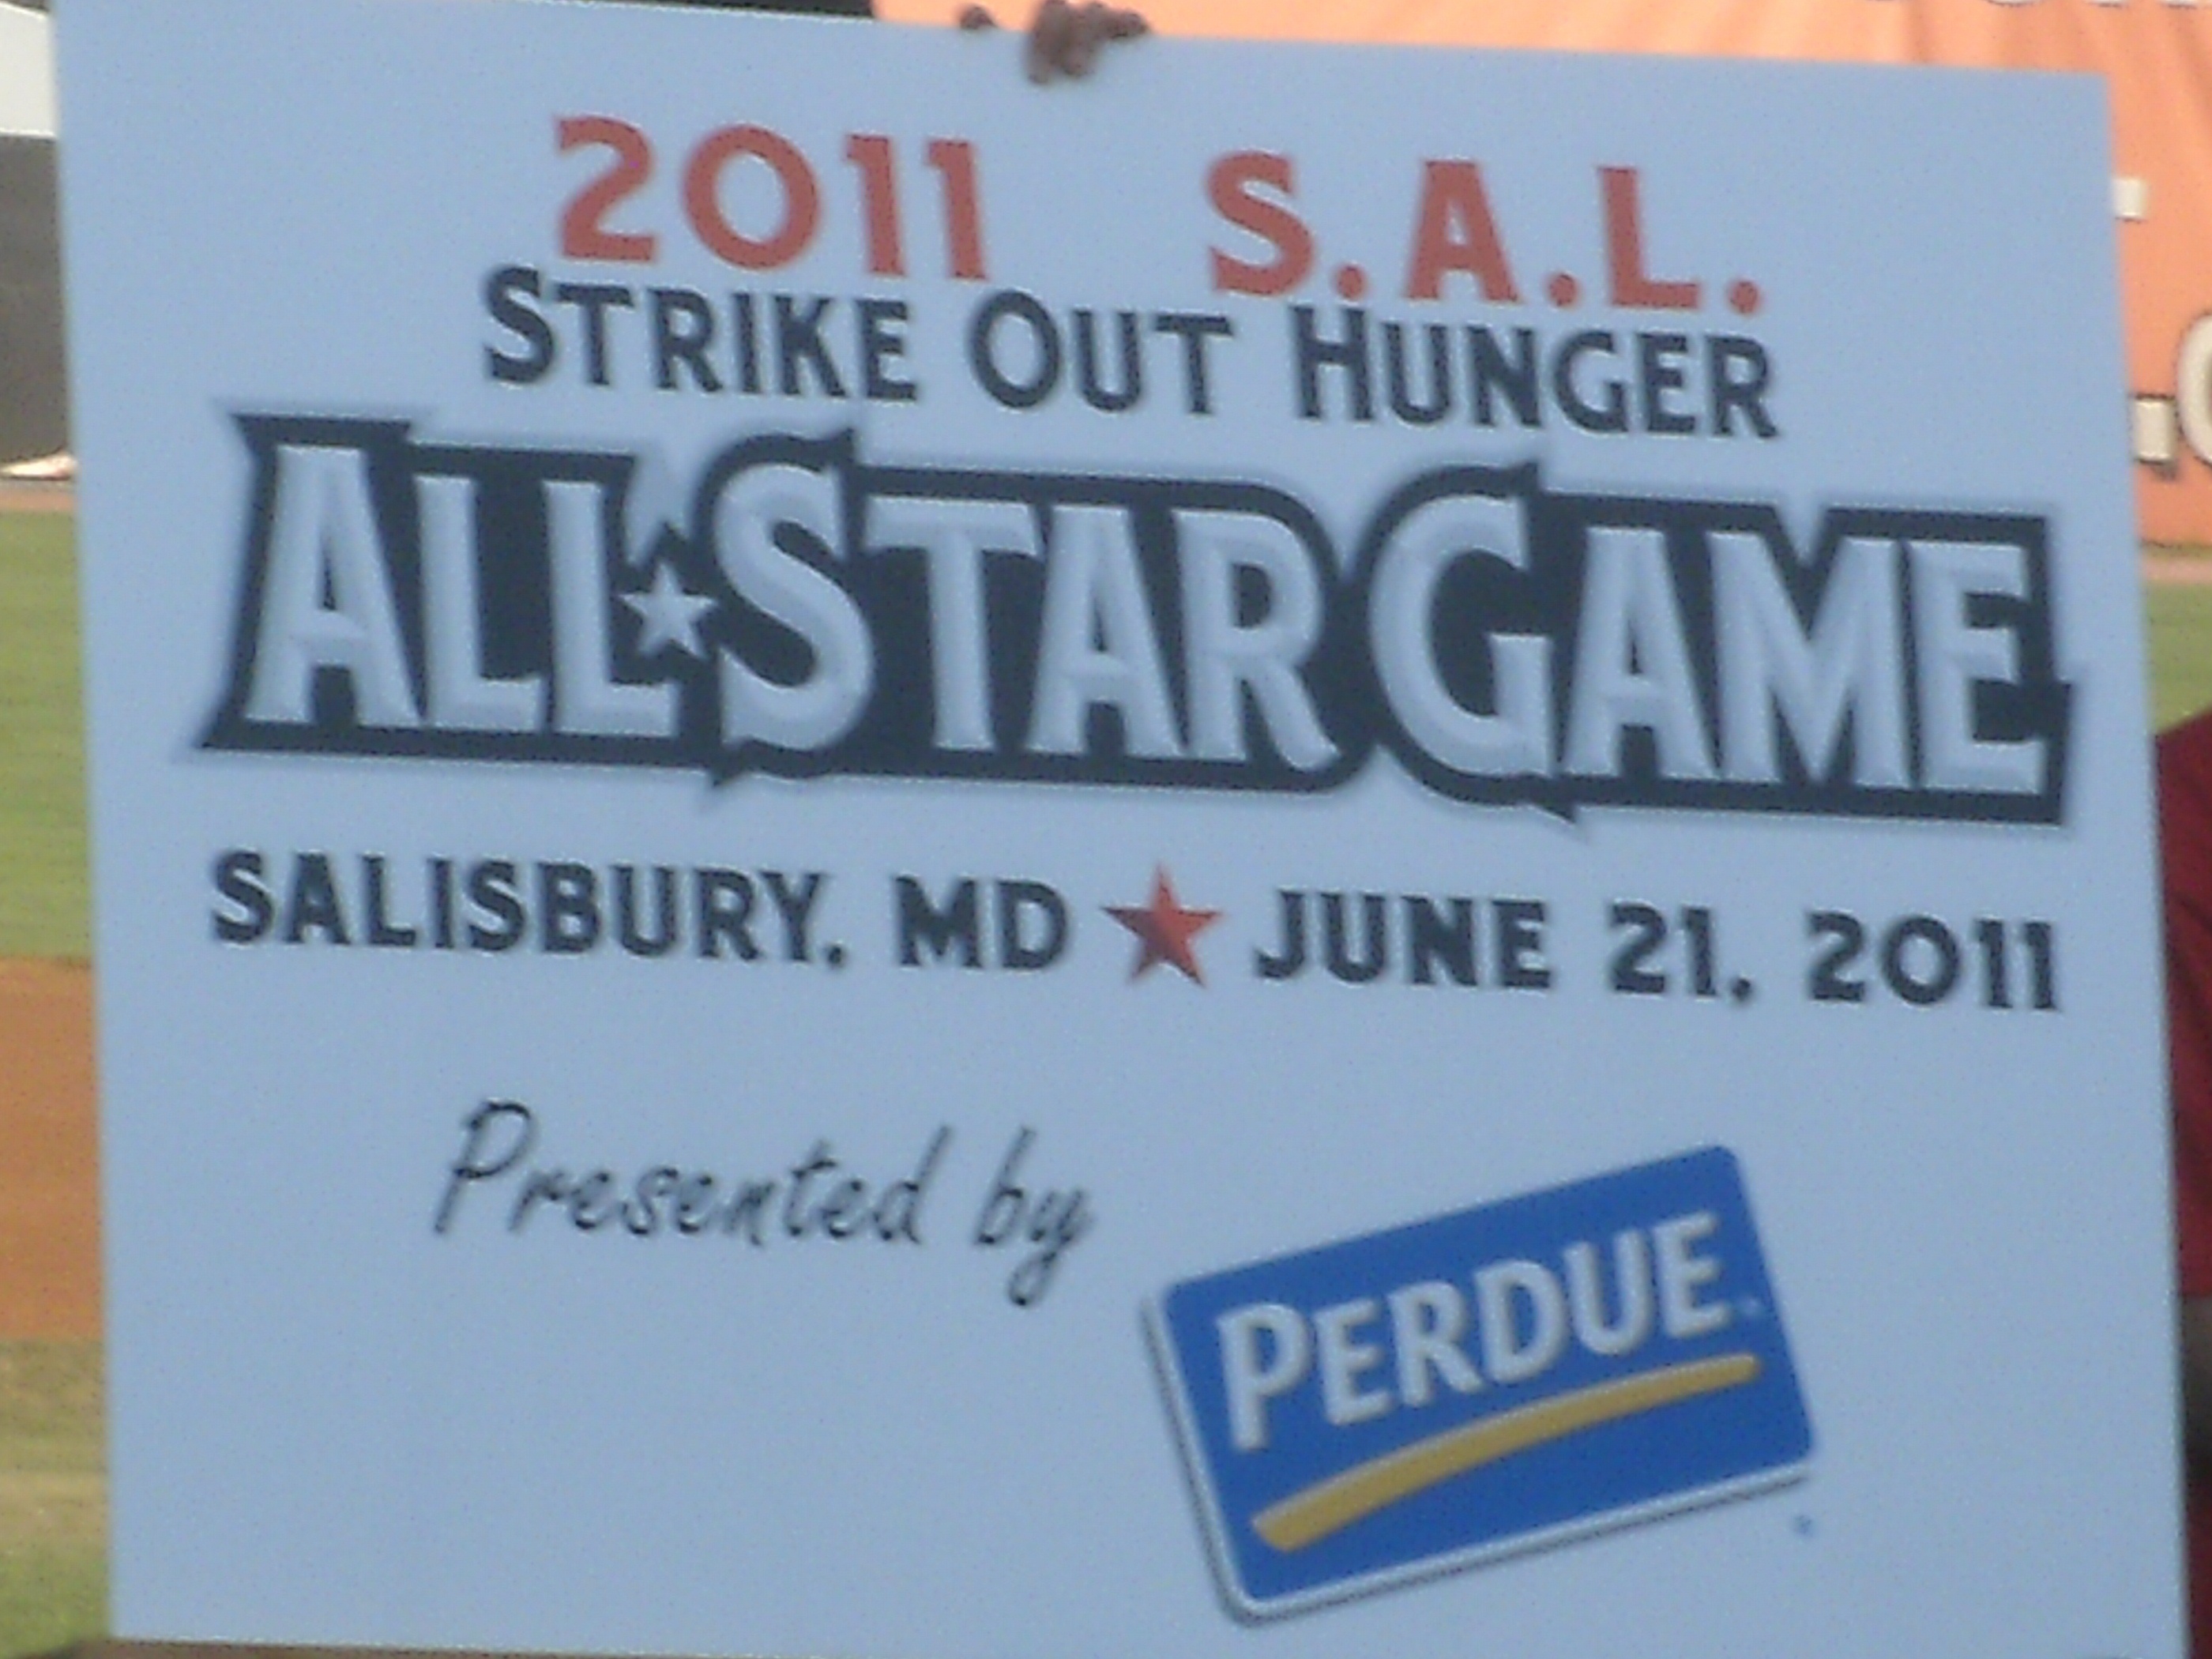 The placard revealed at last night's Shorebirds game.